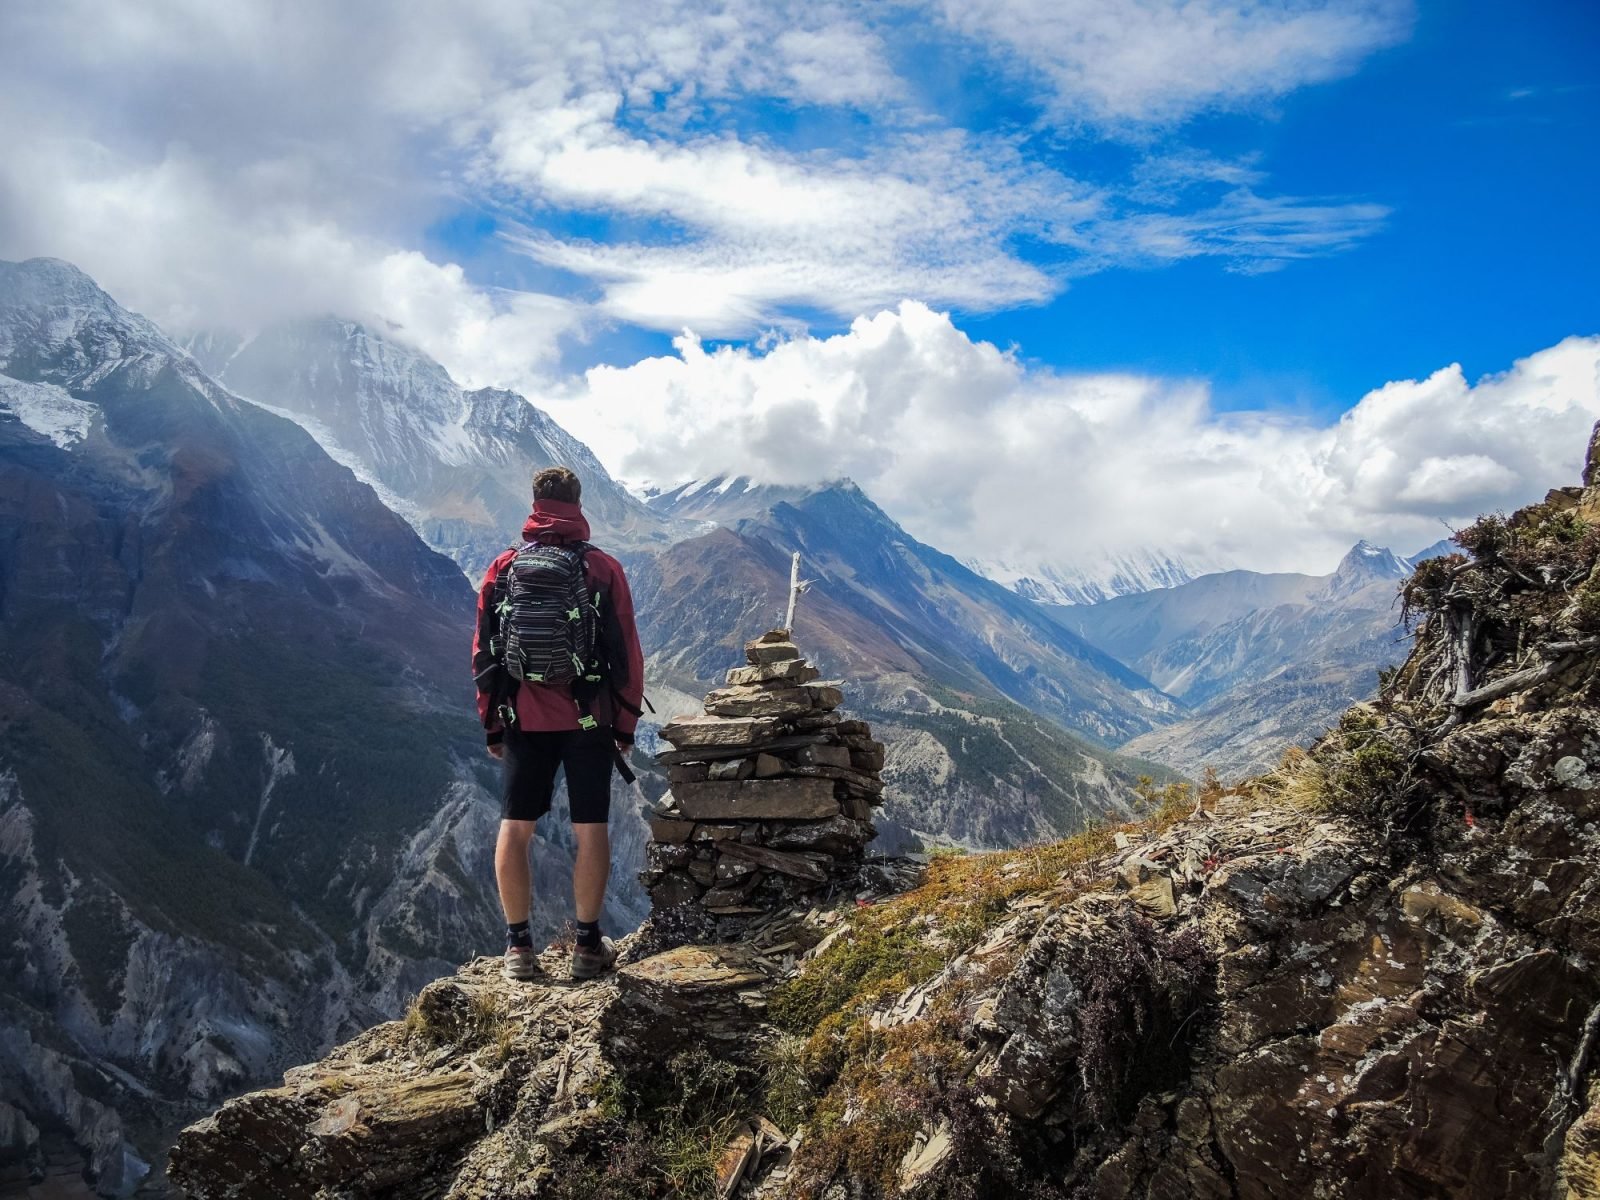 A hiker looks out over the picturesque Manang Valley in Nepal